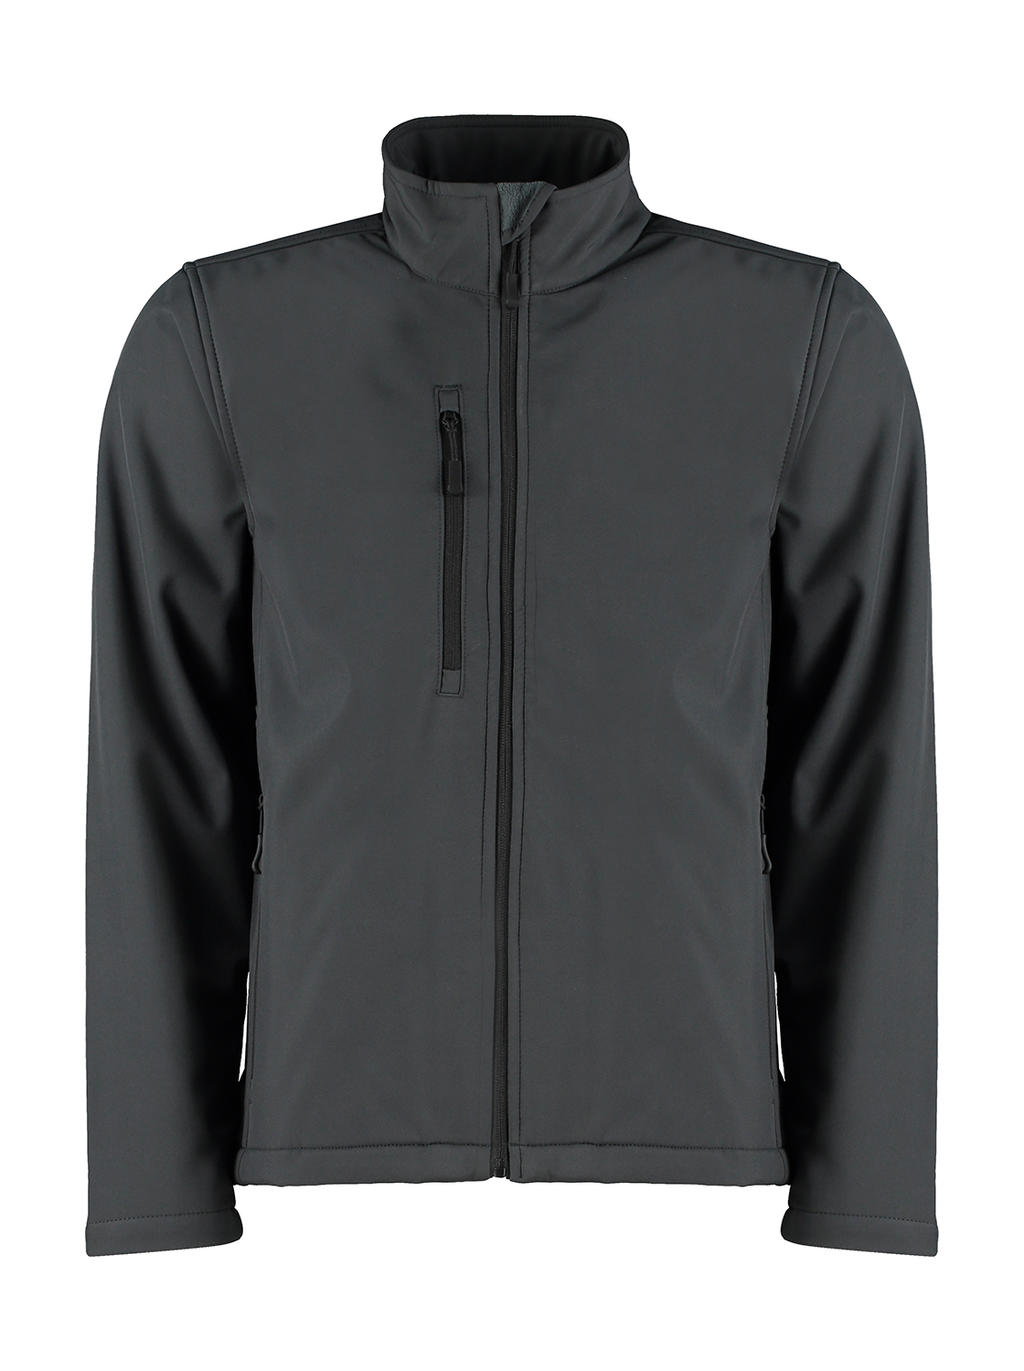  Regular Fit Soft Shell Jacket in Farbe Graphite